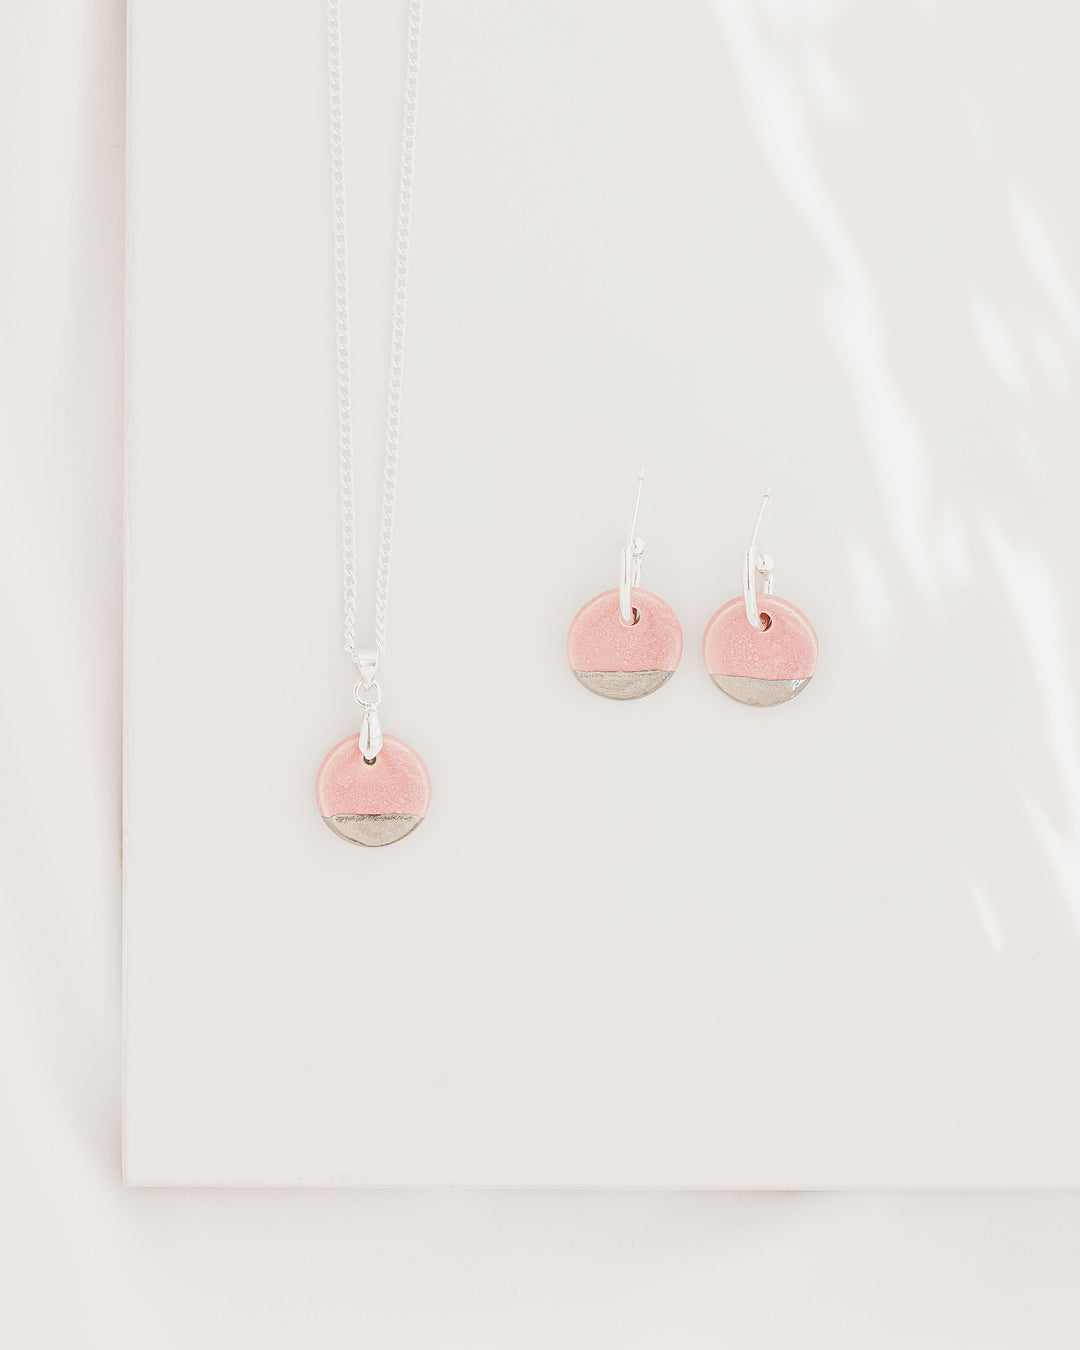 *New* Circle Shaped Ceramic pendant necklace and huggies gift set